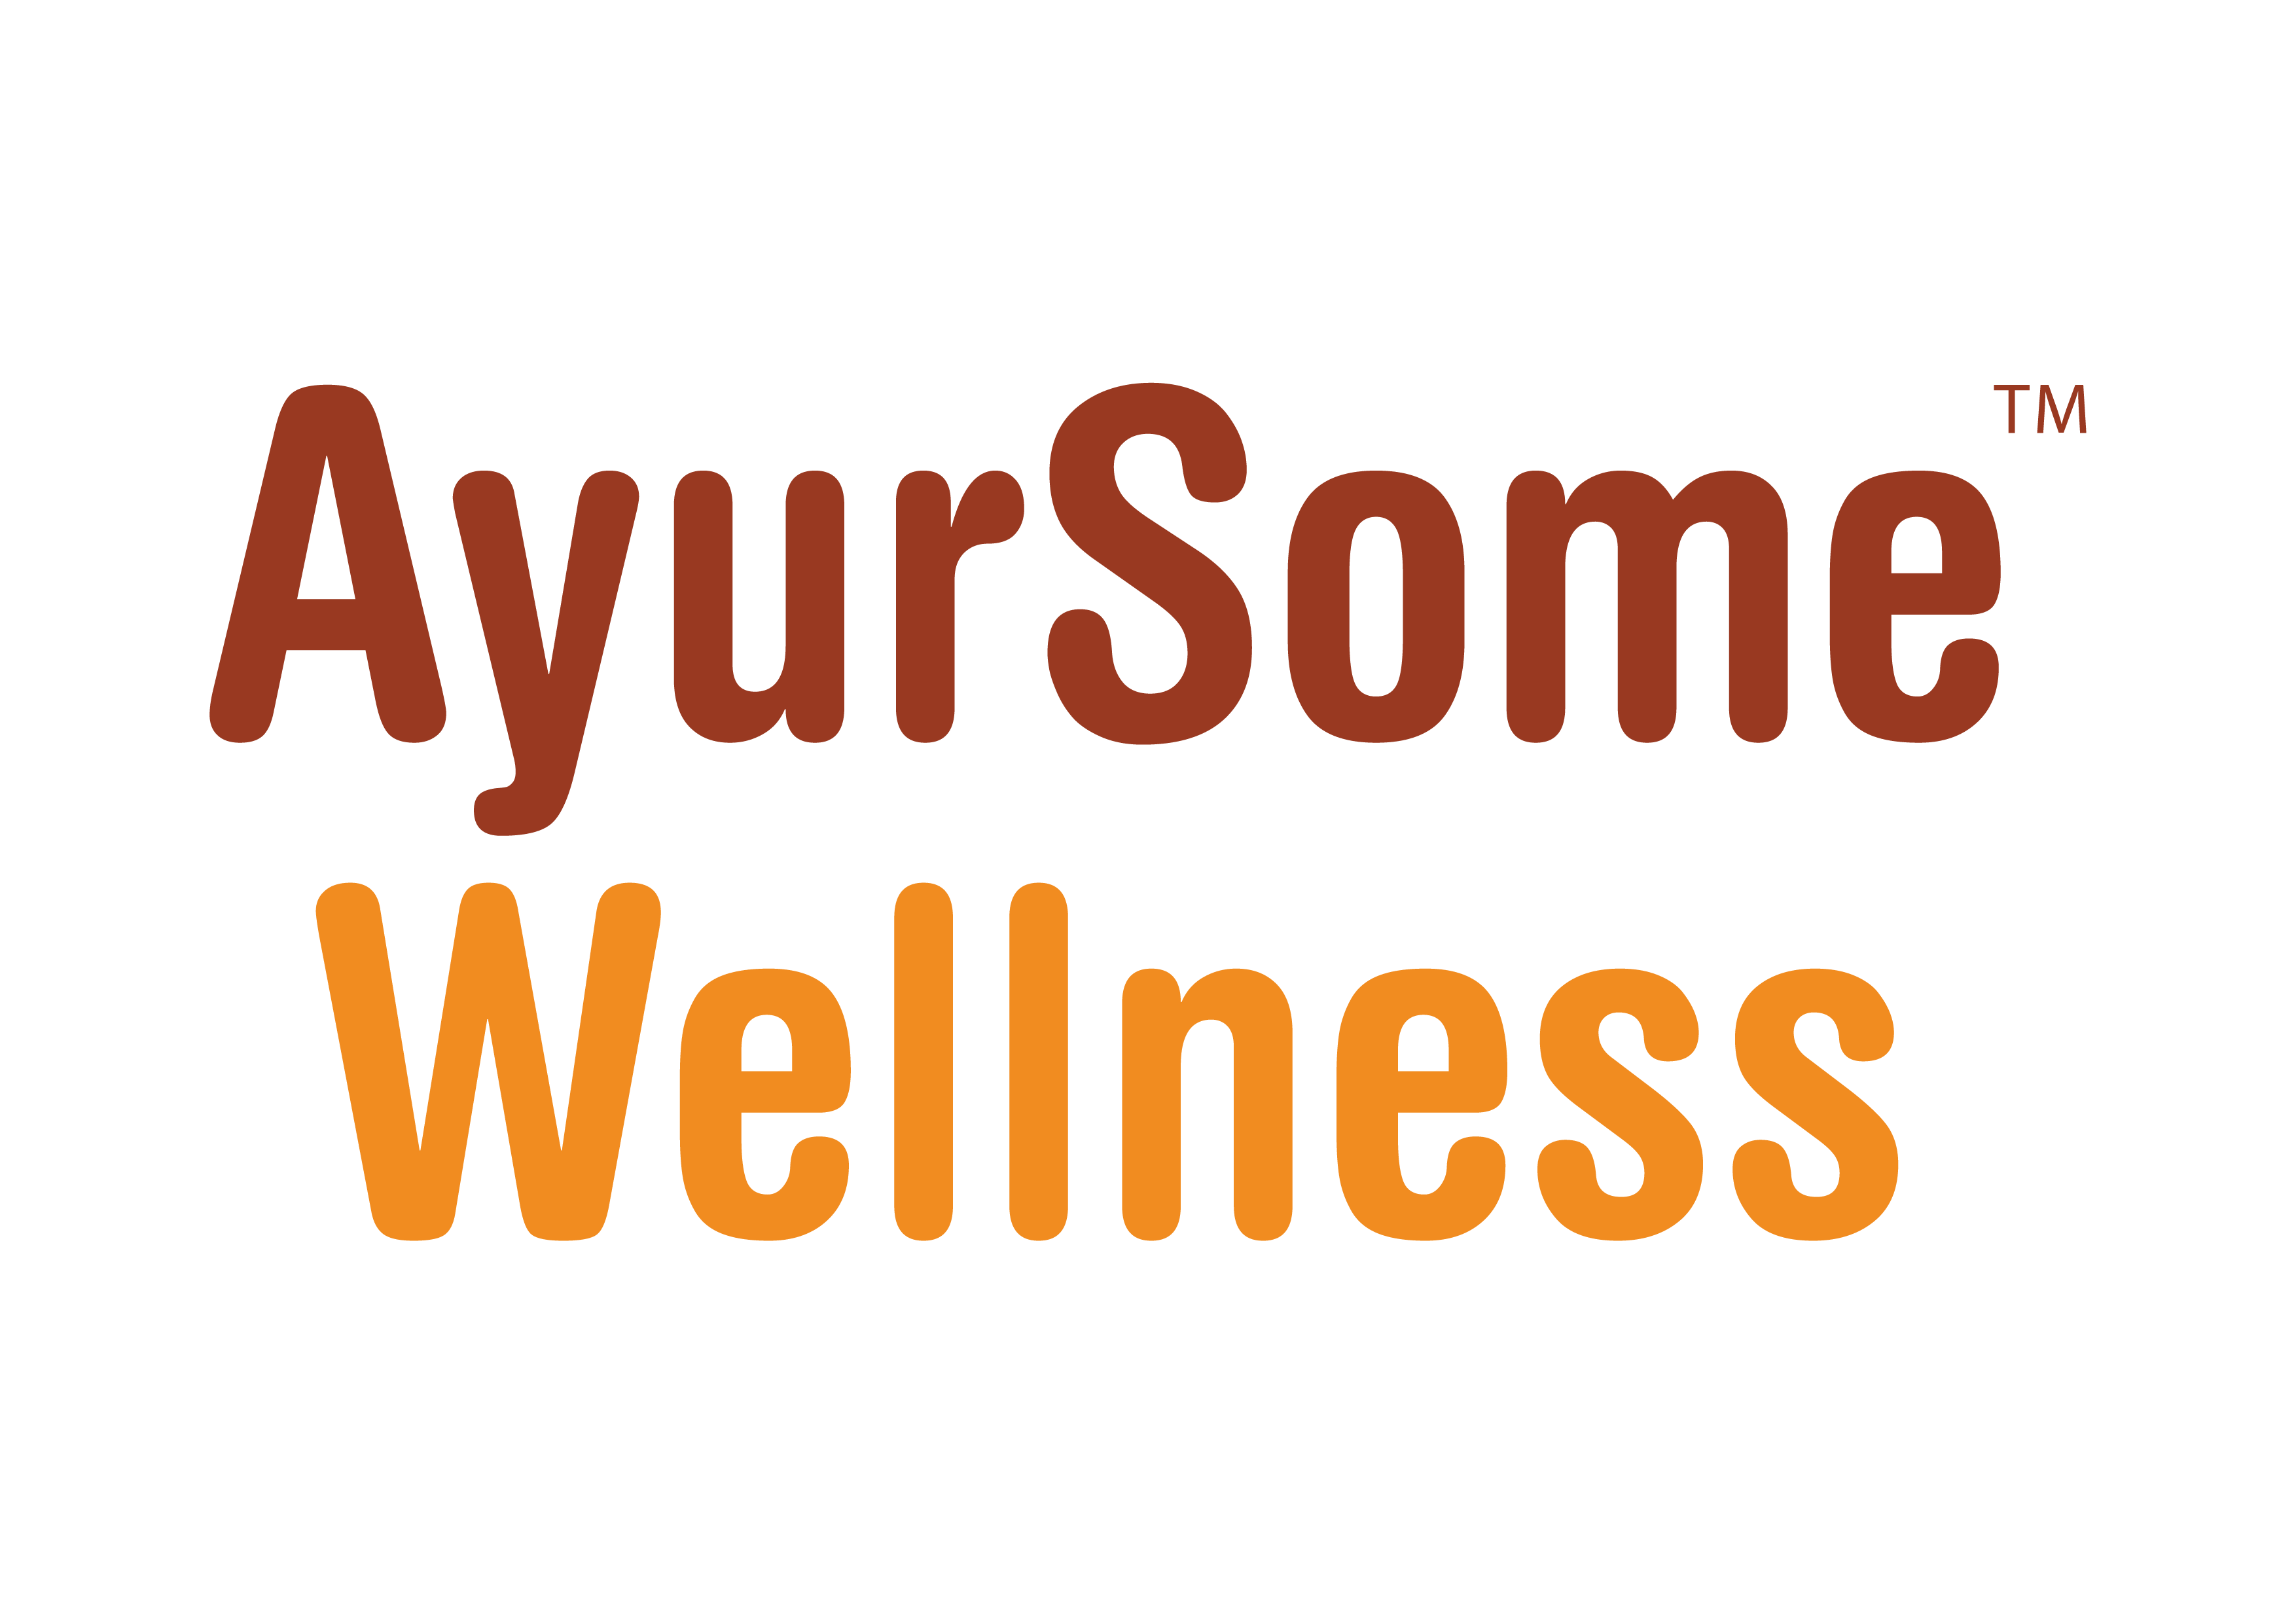 Logo of Ayursome wellness formerly ayursome foods, an einkorn cookies and millet cookies brand with herbal teas and turmeric spice for golden latte